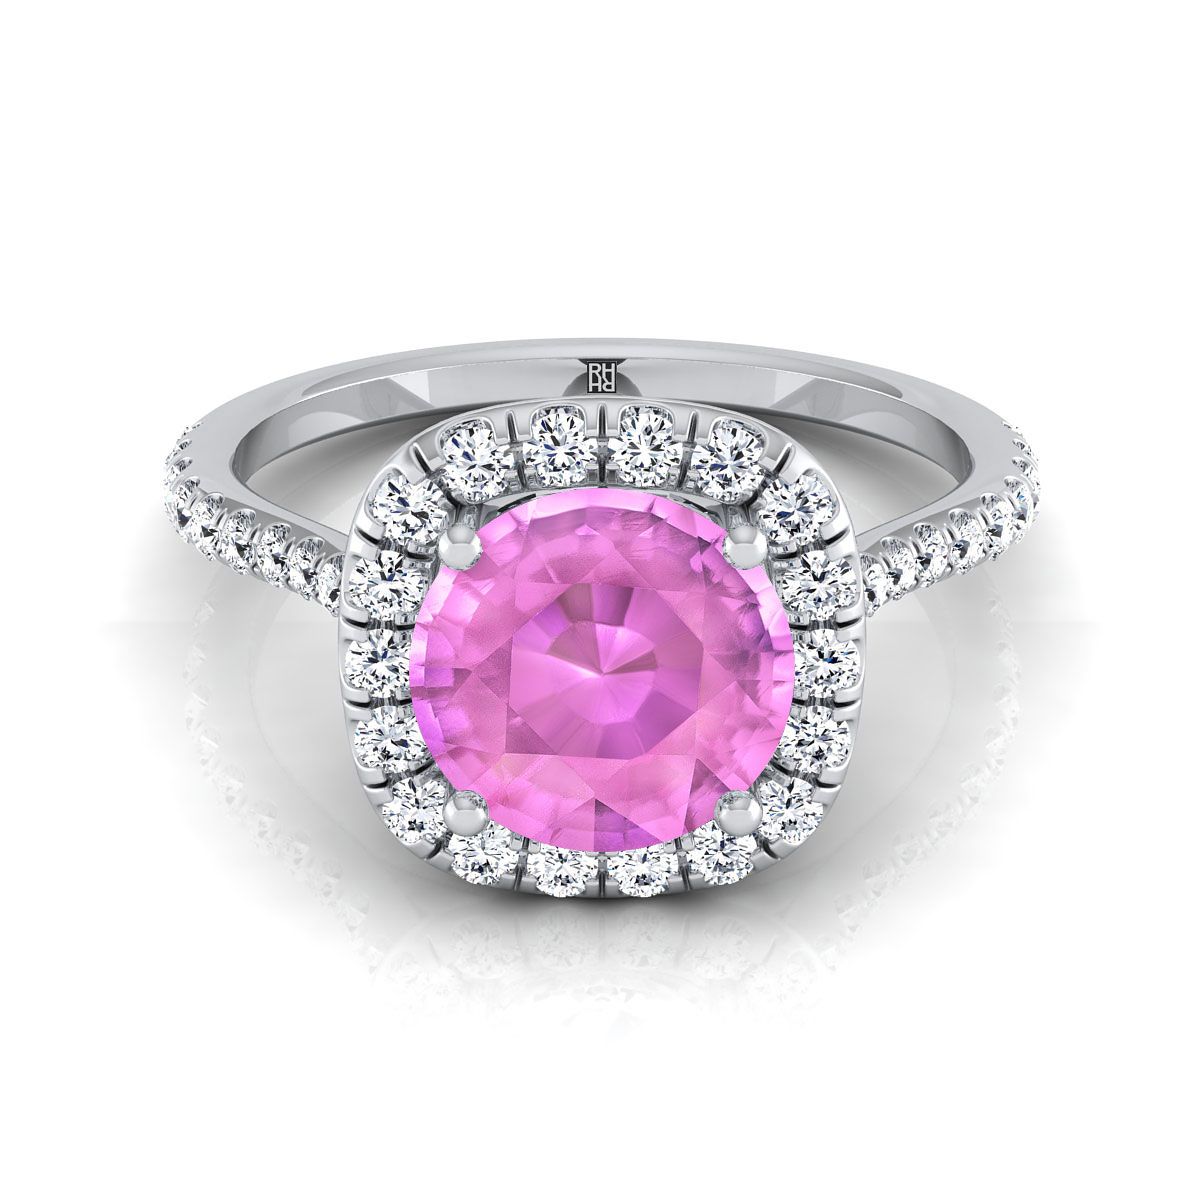 14K White Gold Round Brilliant Pink Sapphire Shared Prong Diamond Halo Engagement Ring -3/8ctw